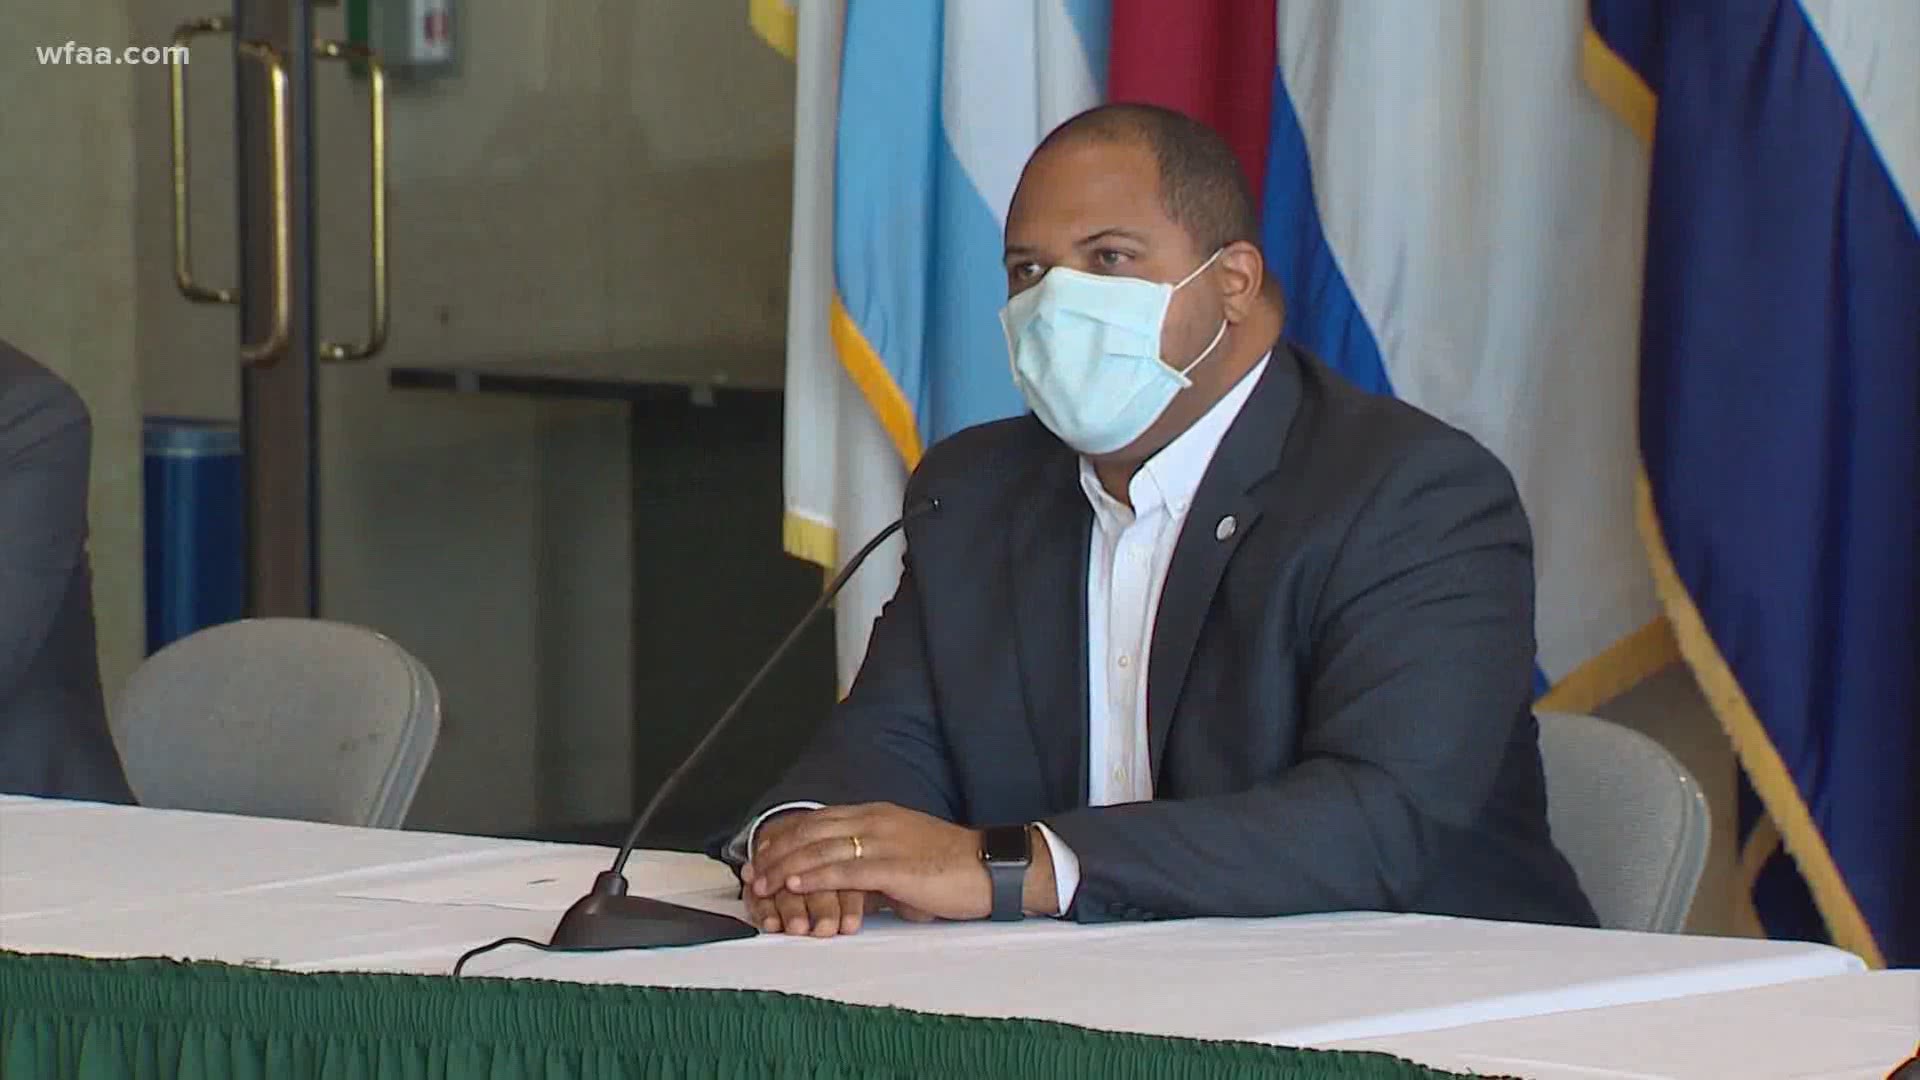 Johnson also reiterated that people need to wear masks.